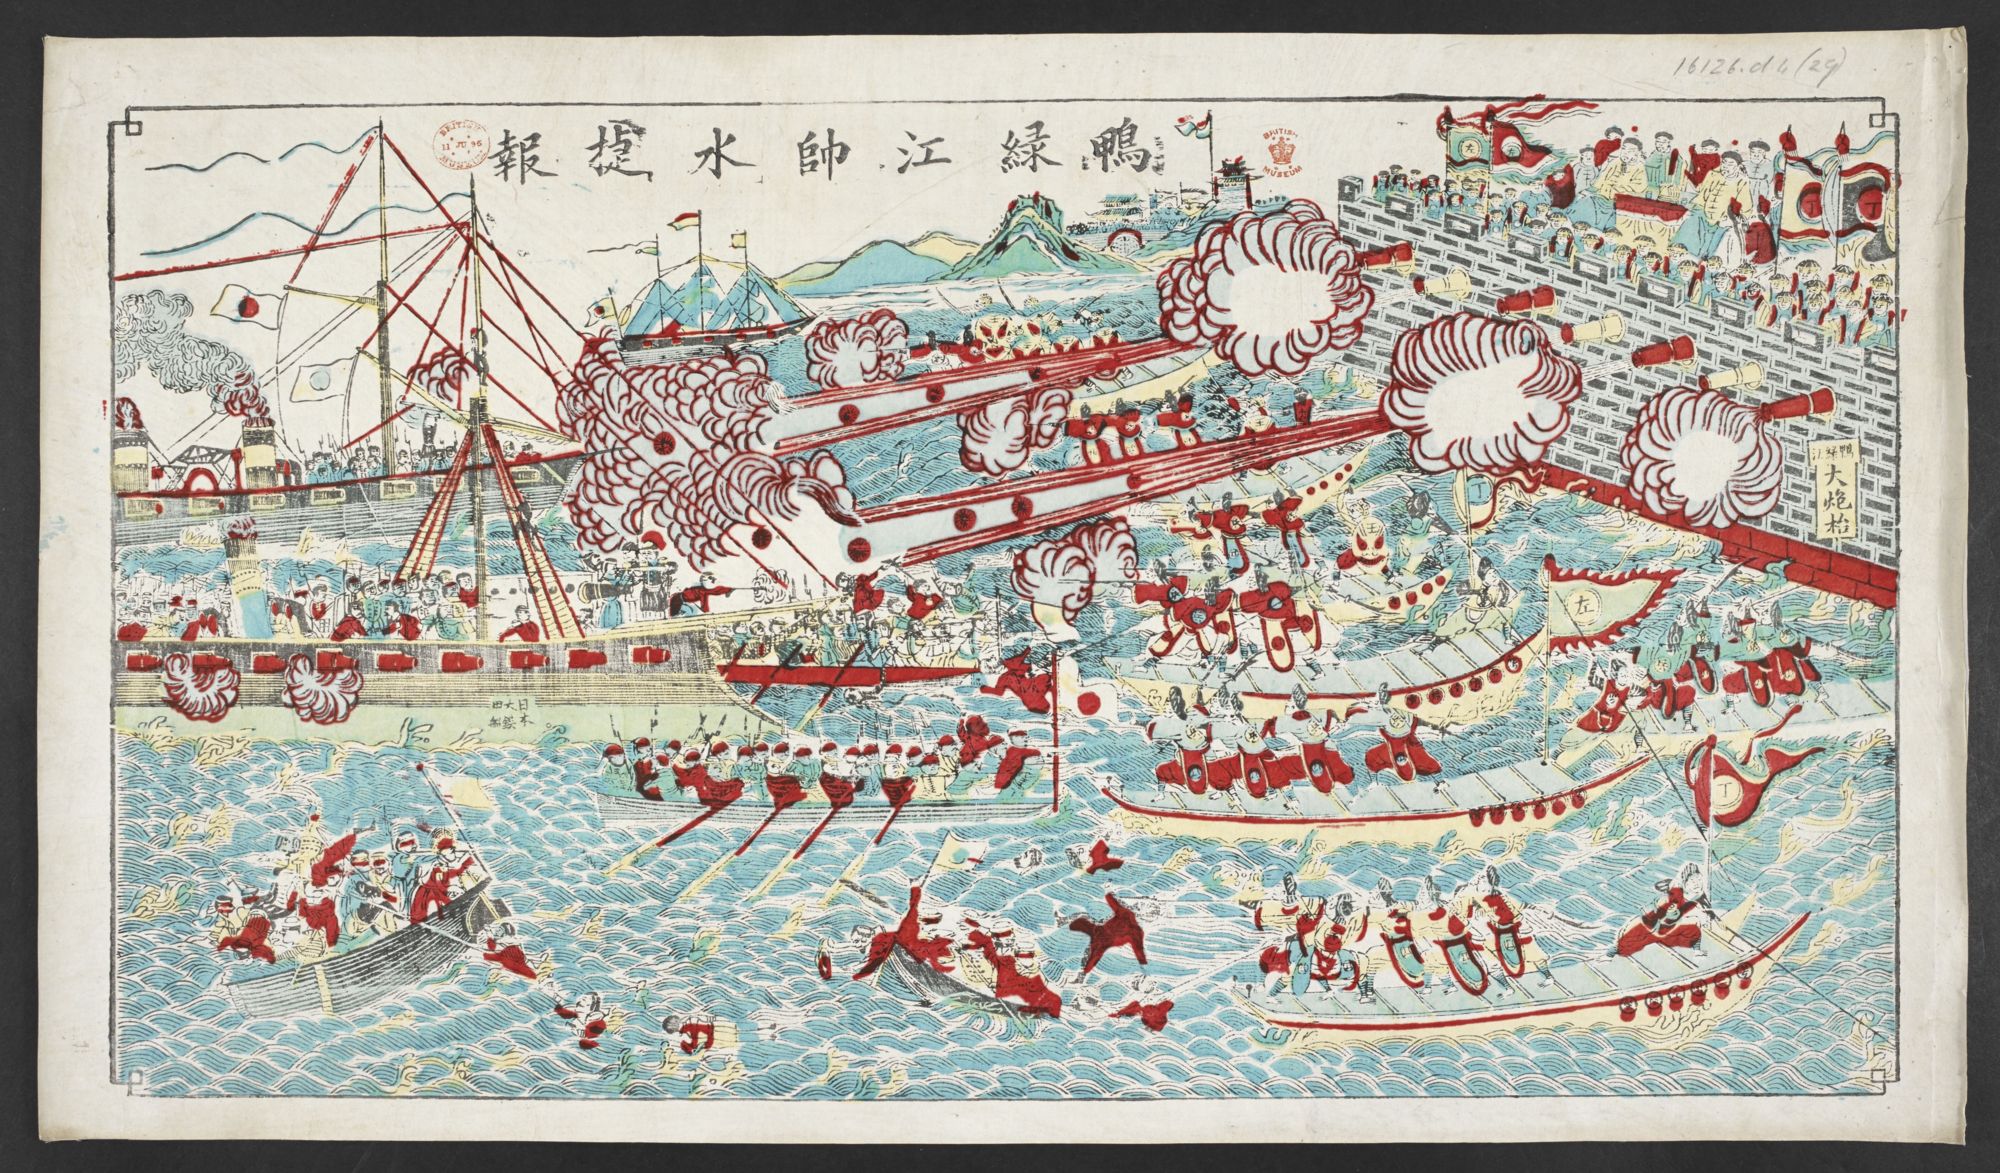 The victorious battle at the Yalu River